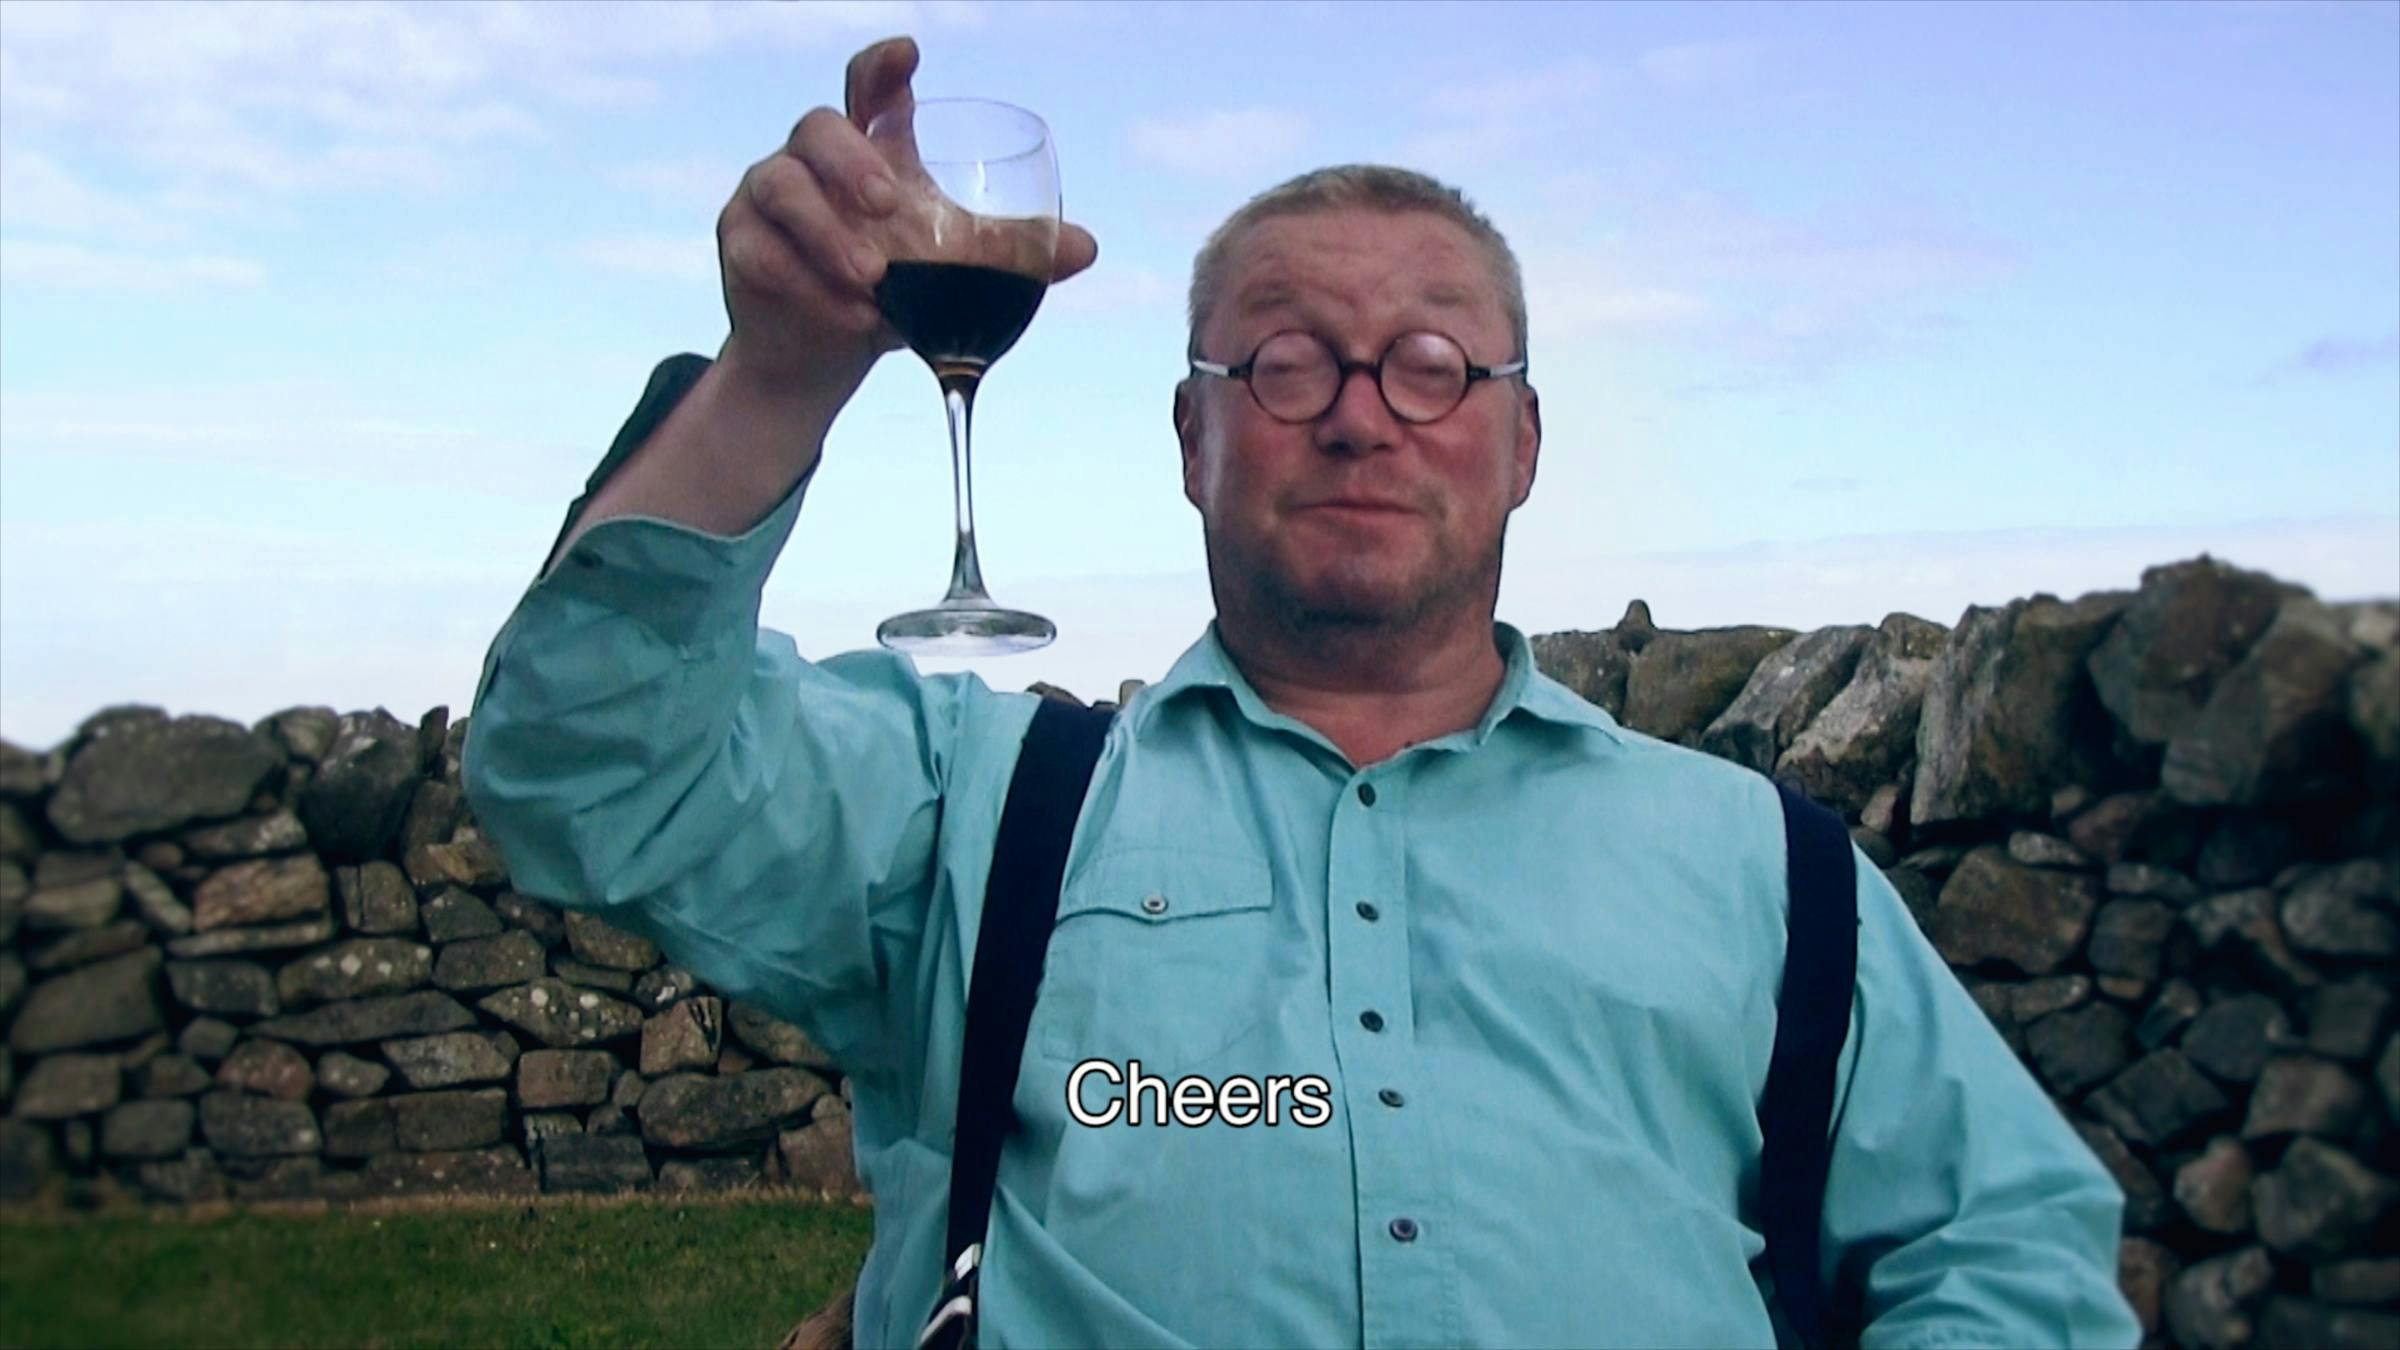 A man wearing a blue shirt with braces on top, small circular glasses, holding up a glass of red wine. In the background there is a stone wall and grass. The word 'Cheers' is superimposed on top.